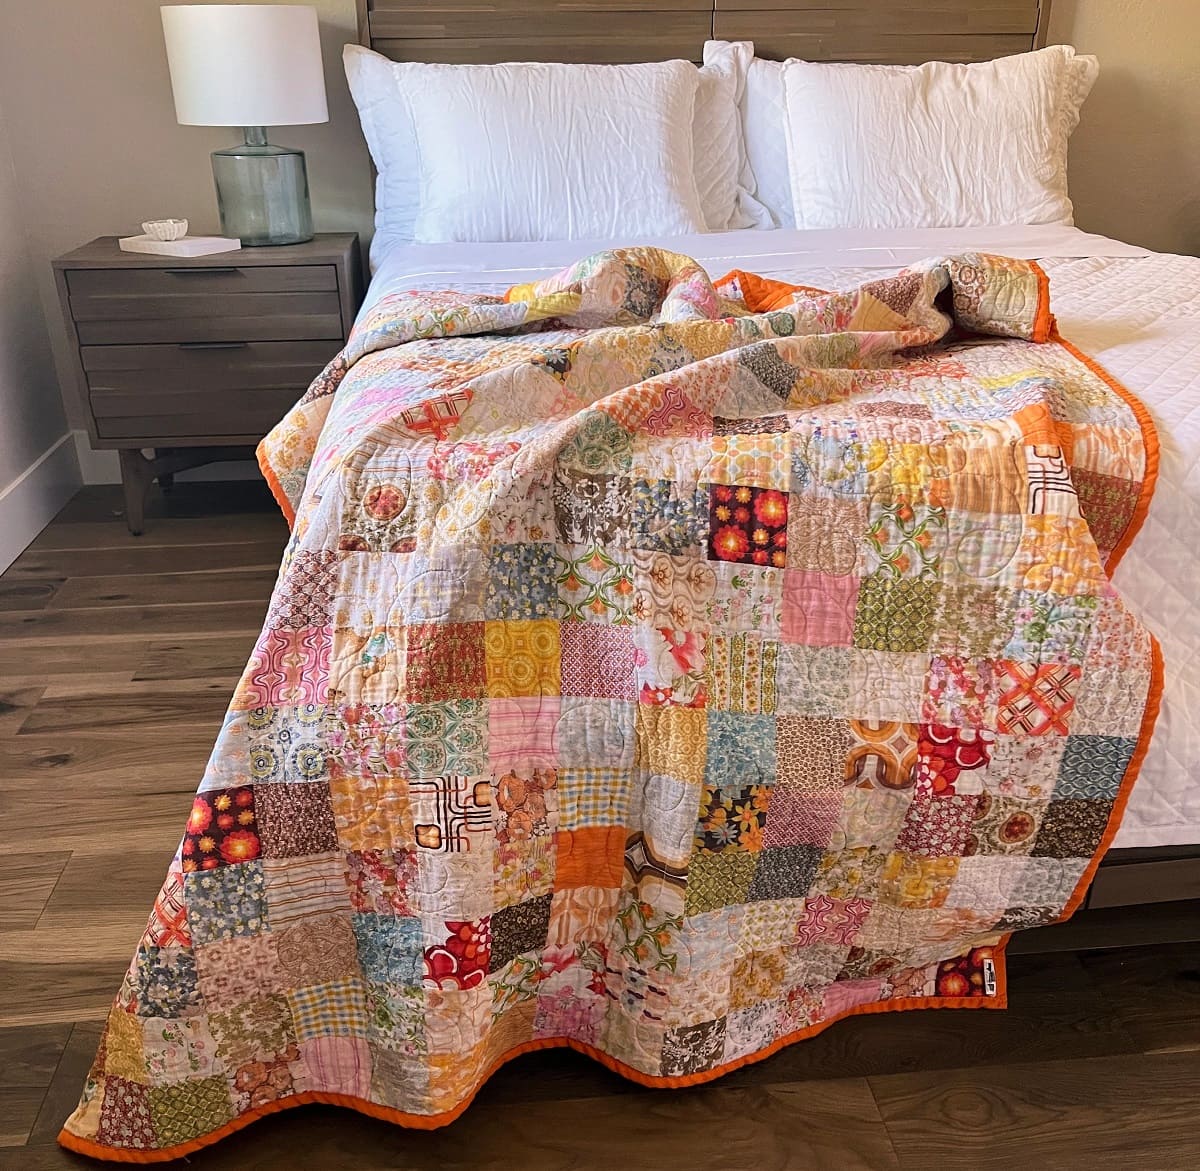 How Much Is A Handmade Quilt Worth